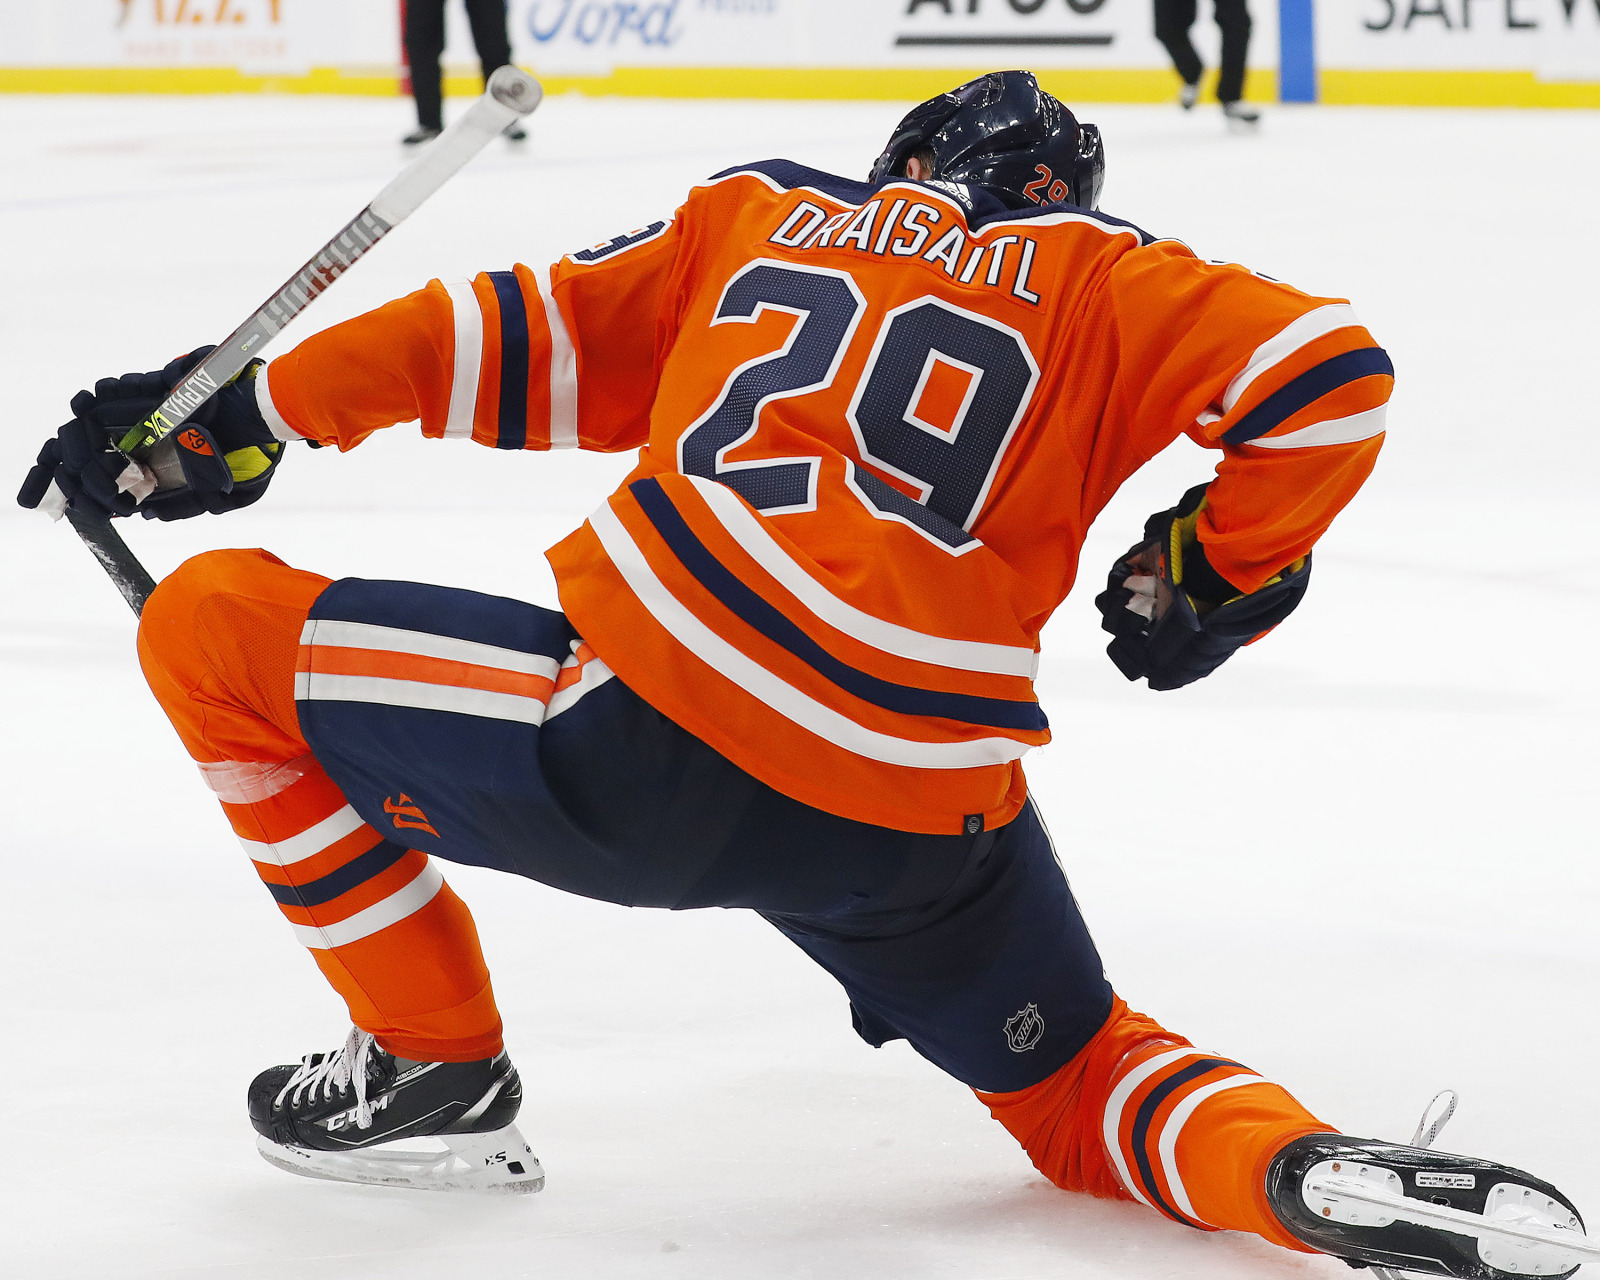 Could Leon Draisaitl be heading back to Europe?